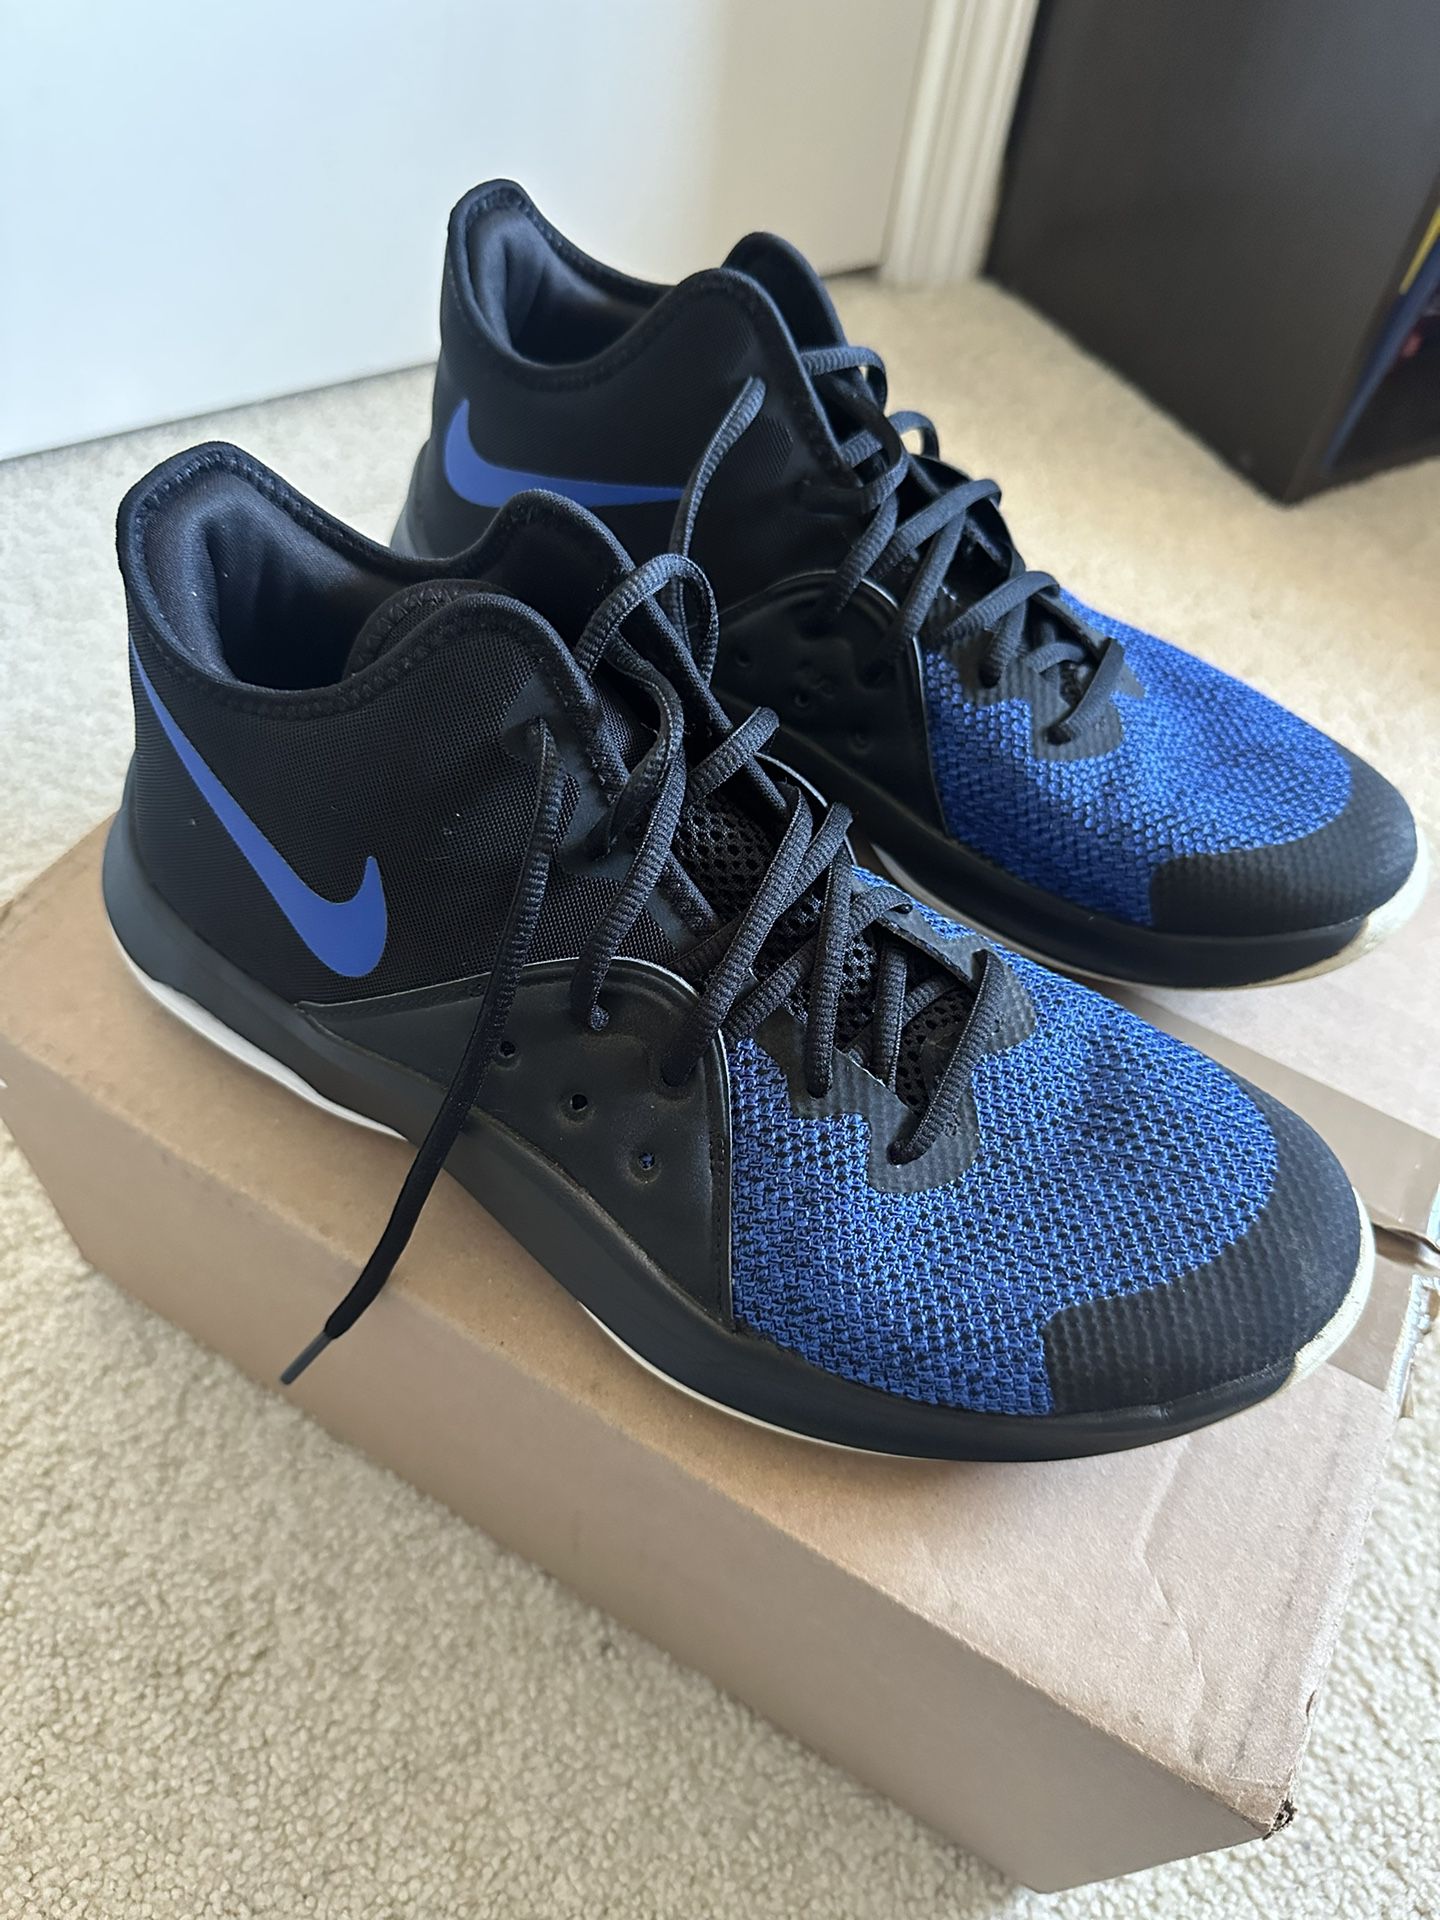 Nike Air Versatile 3 Game Royal 9.5M for Sale in Clayton, CA - OfferUp